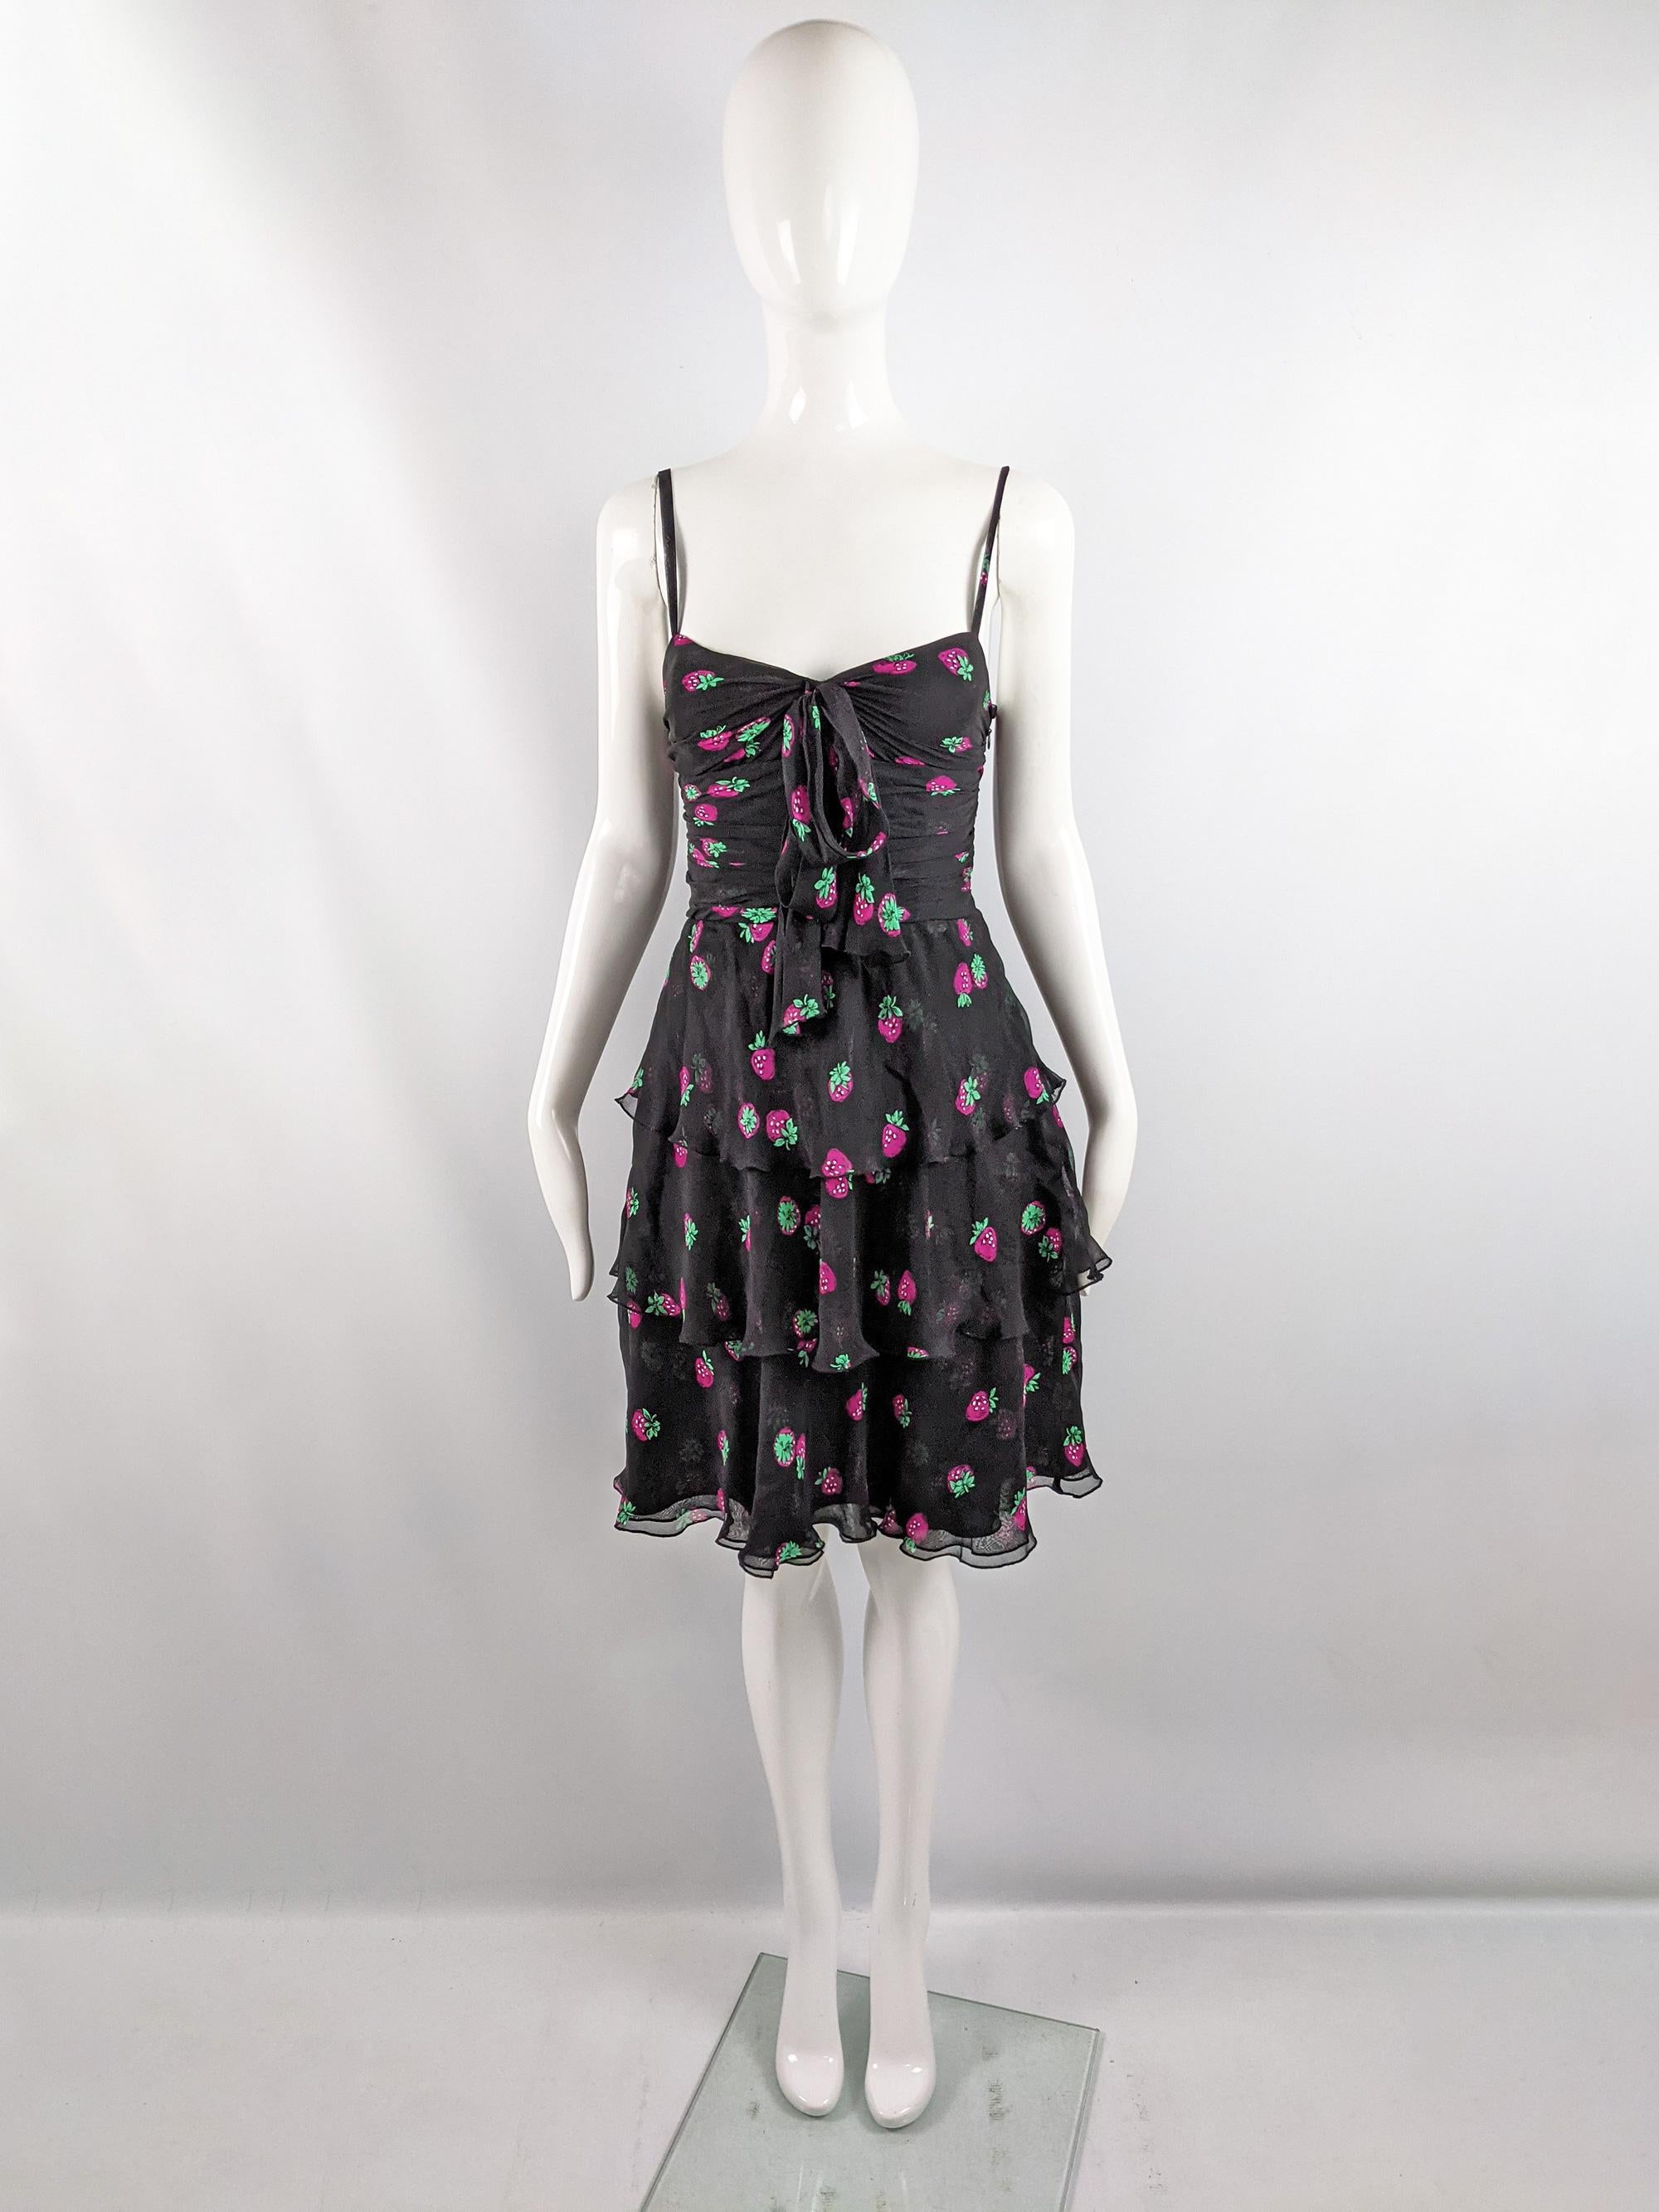 A super cute sleeveless vintage Moschino strappy party dress from the late 90s / early 2000s. In a black pure silk chiffon with a sweet, pink strawberry pattern throughout and a frilly / ruffled tiered skirt and ruched bodice. Perfect for the day in